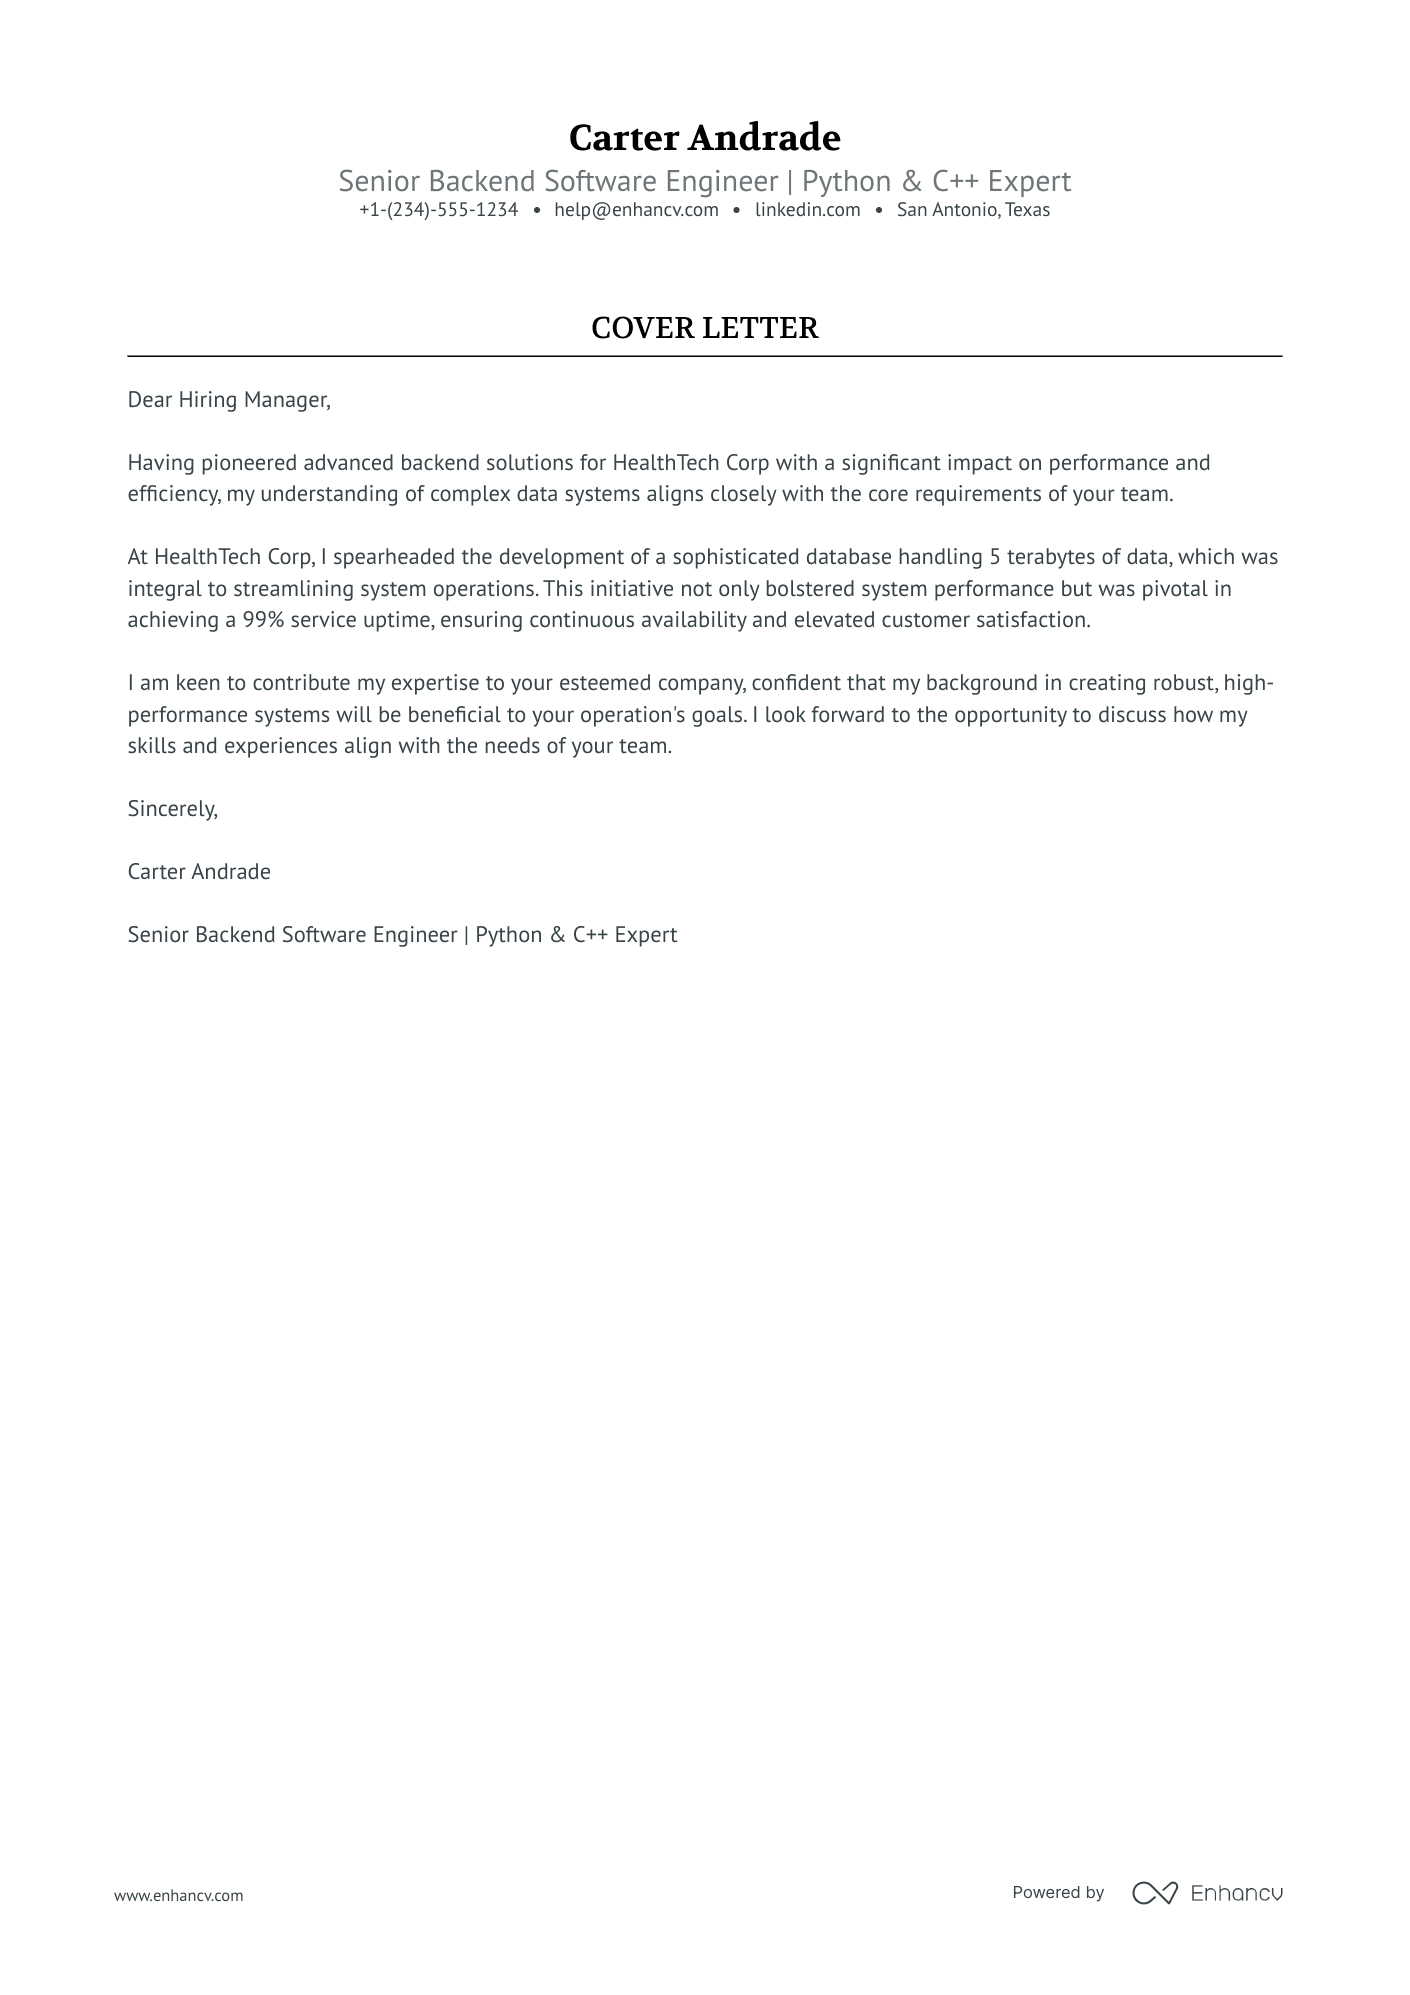 Customer Support Engineer cover letter